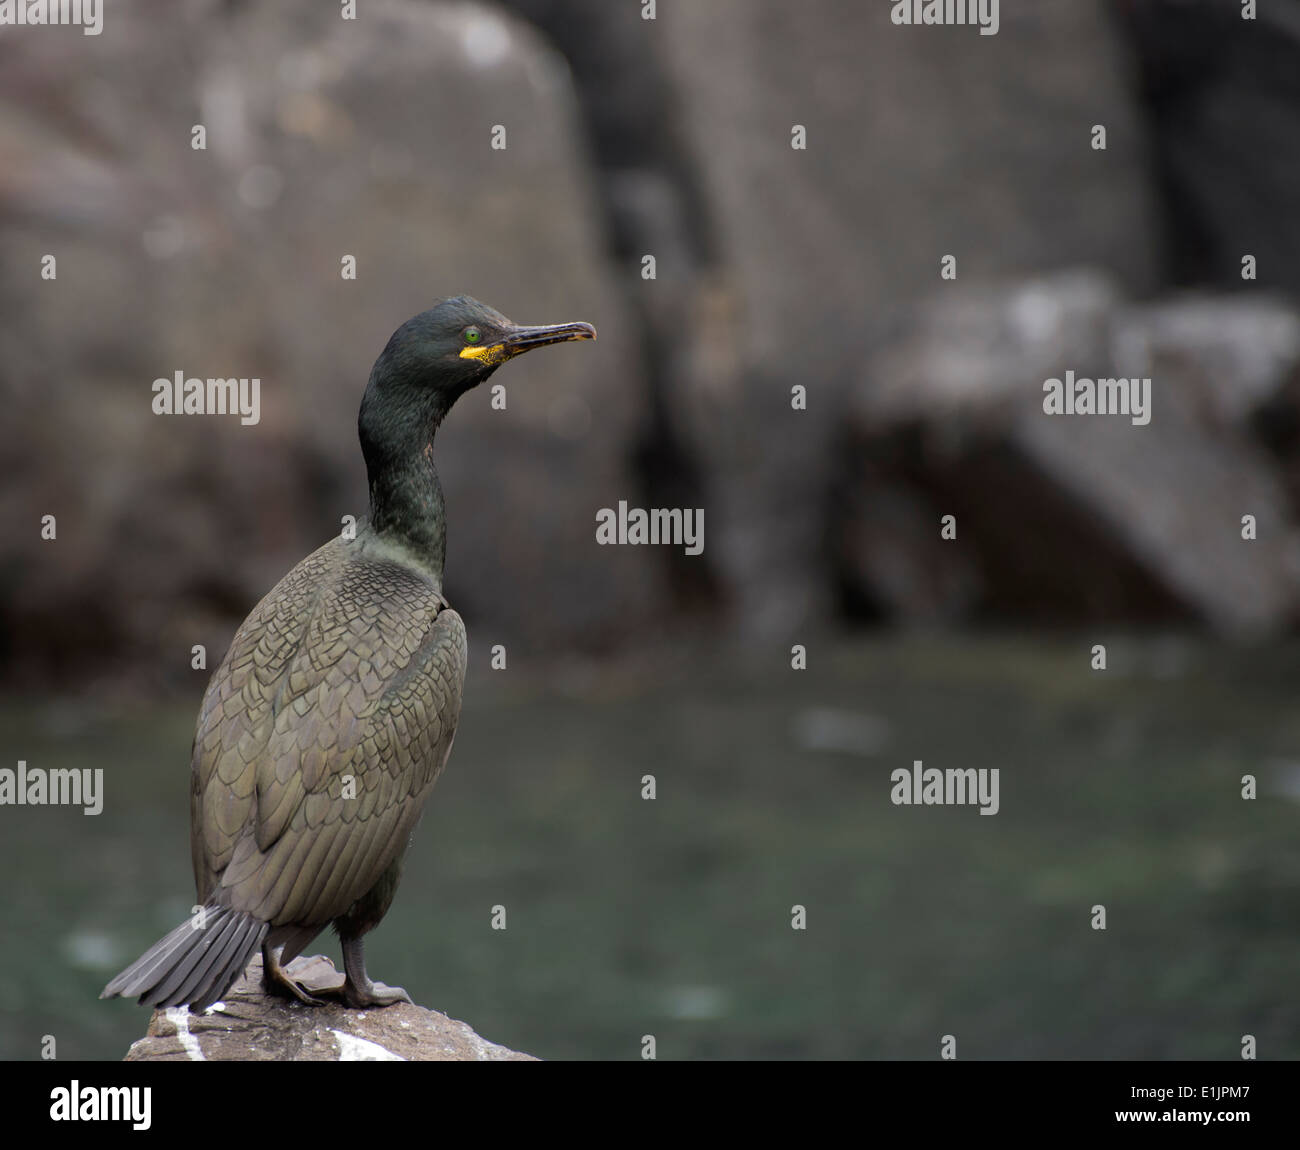 Portrait of a Shag (Green Cormorant) in the Farn Islands, Northumberland, England Stock Photo